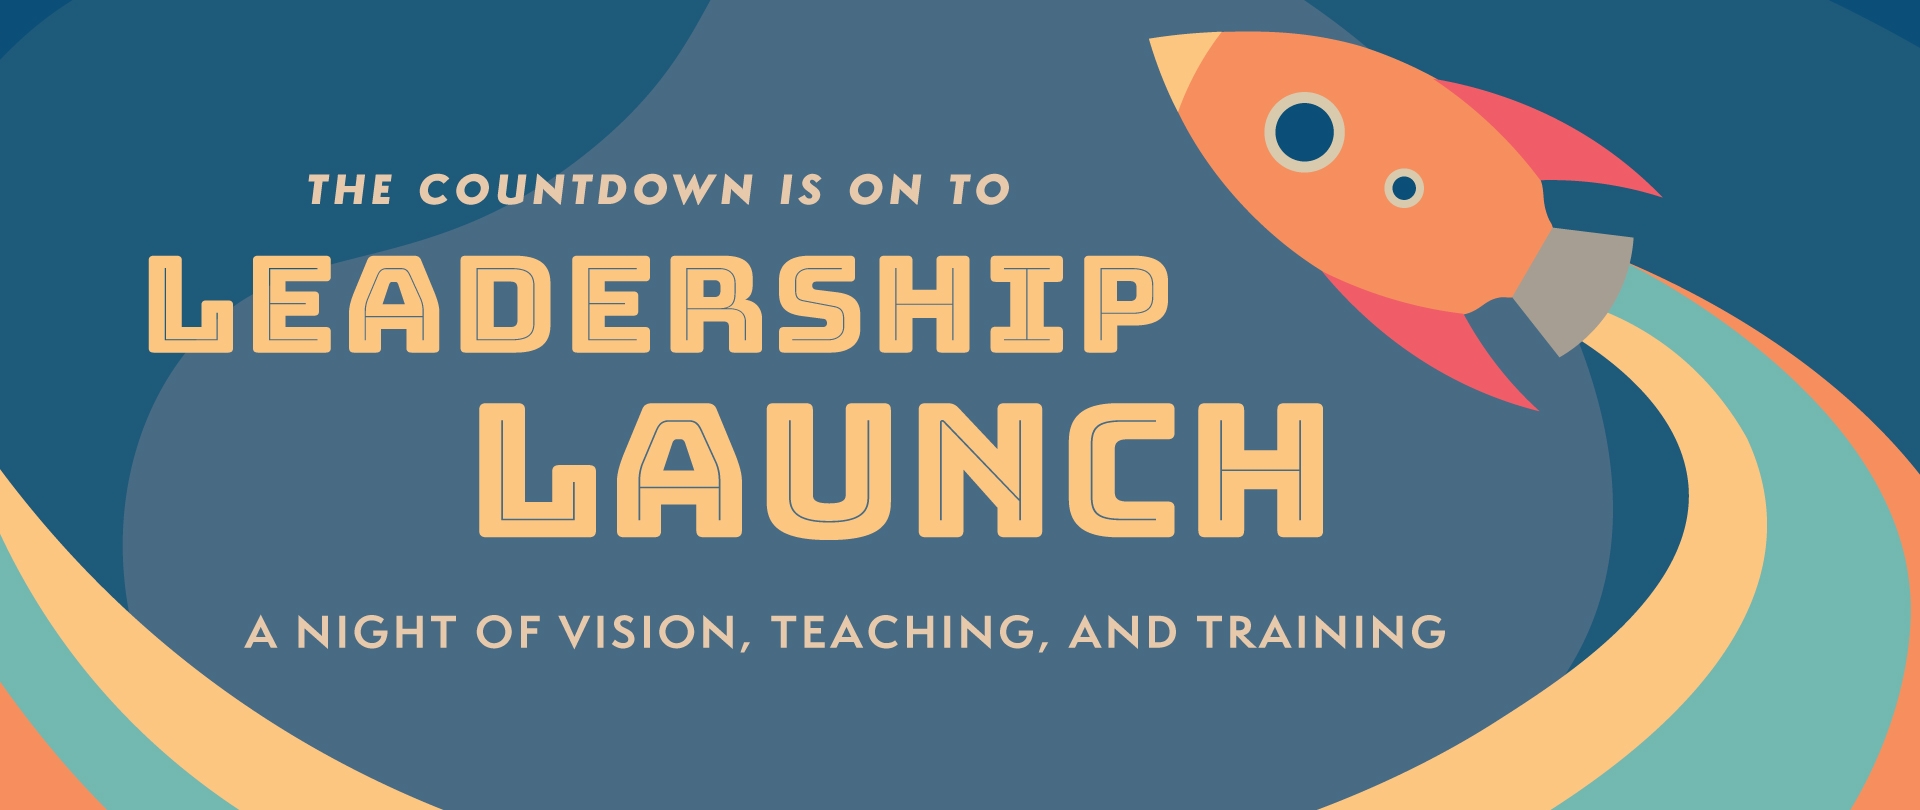 Leadership Launch - A night of vision, teaching ,and training